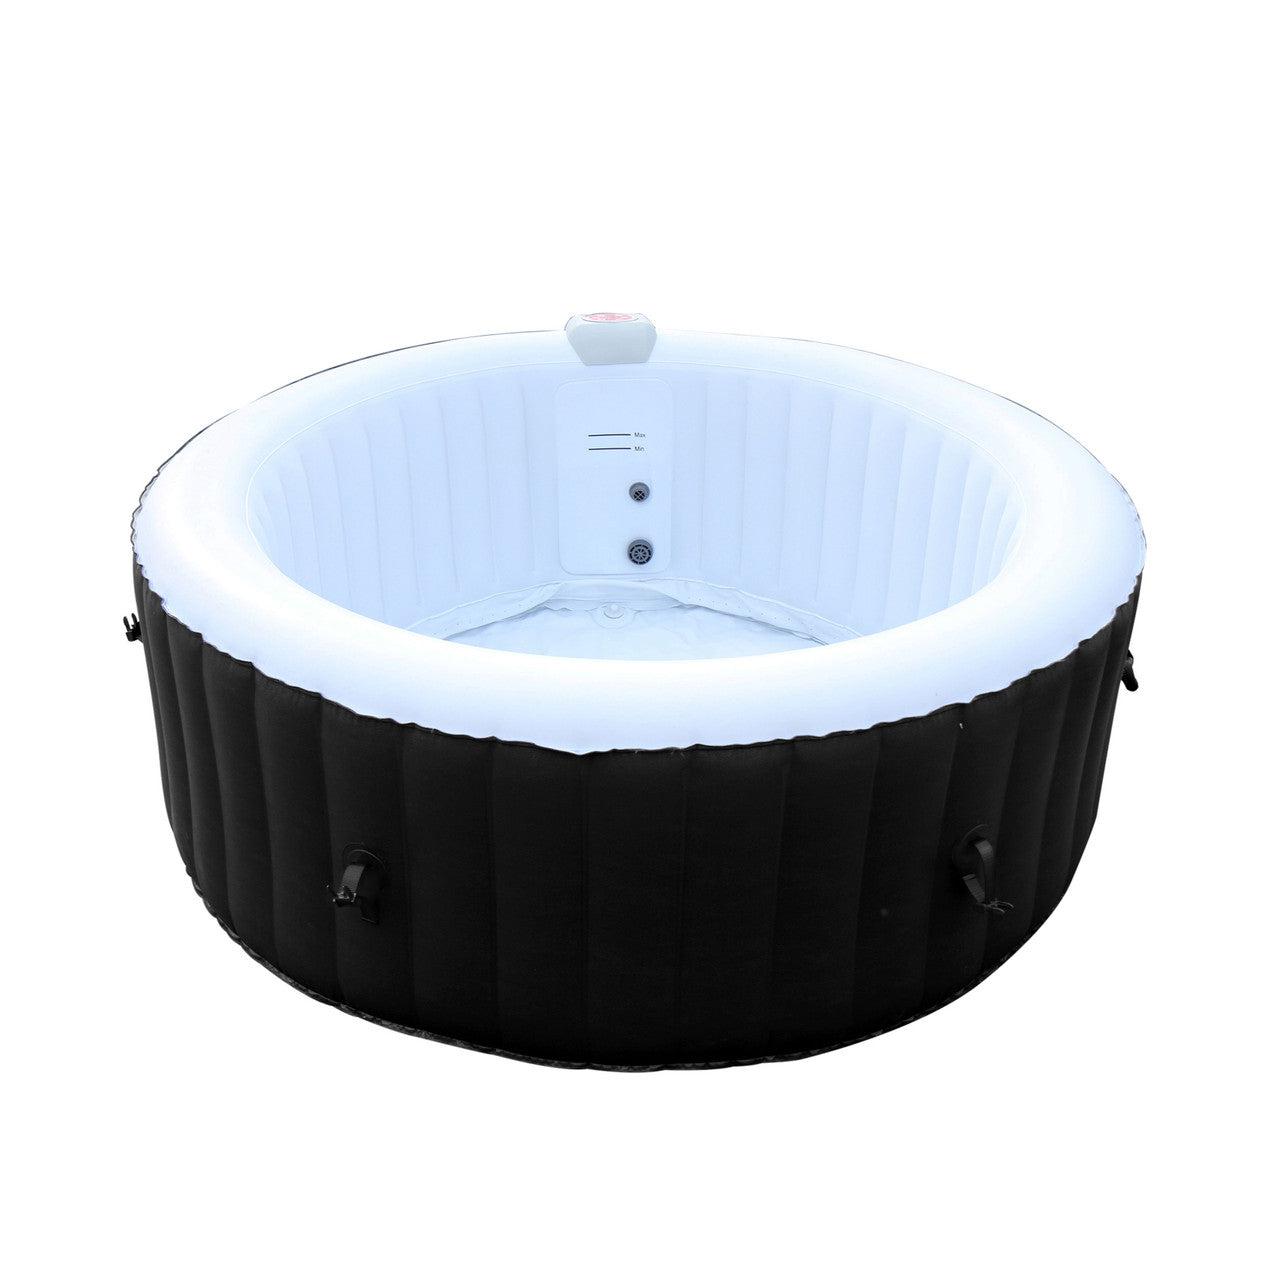 ALEKO 4 Person Black 210 Gallon Round Inflatable Jetted Hot Tub with Cover-Hot Tub-Purely Relaxation